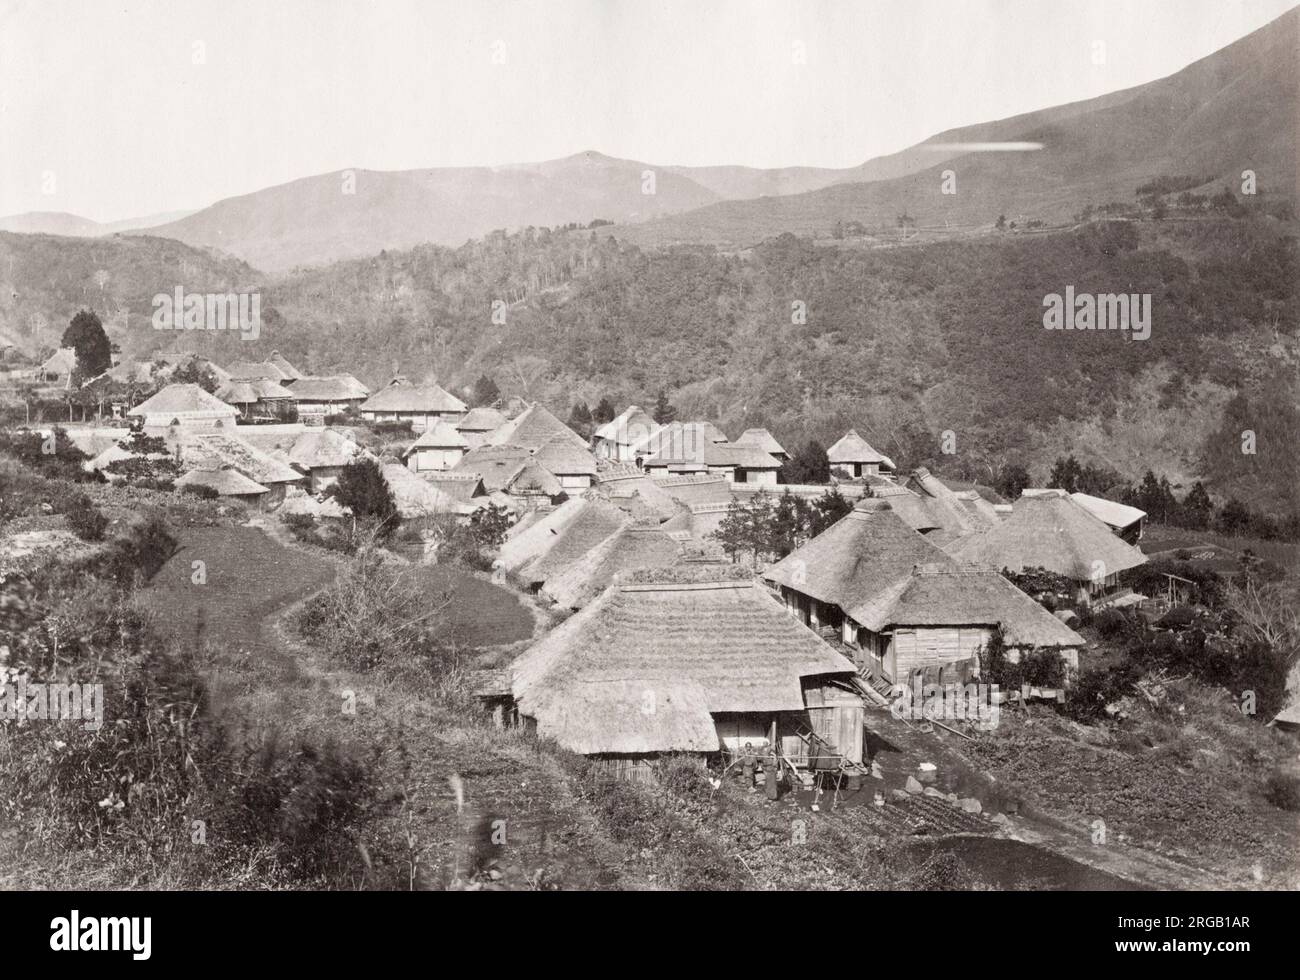 Vintage 19th century photograph: village of Miyanoshita, Japan, well known for its hot springs. Stock Photo